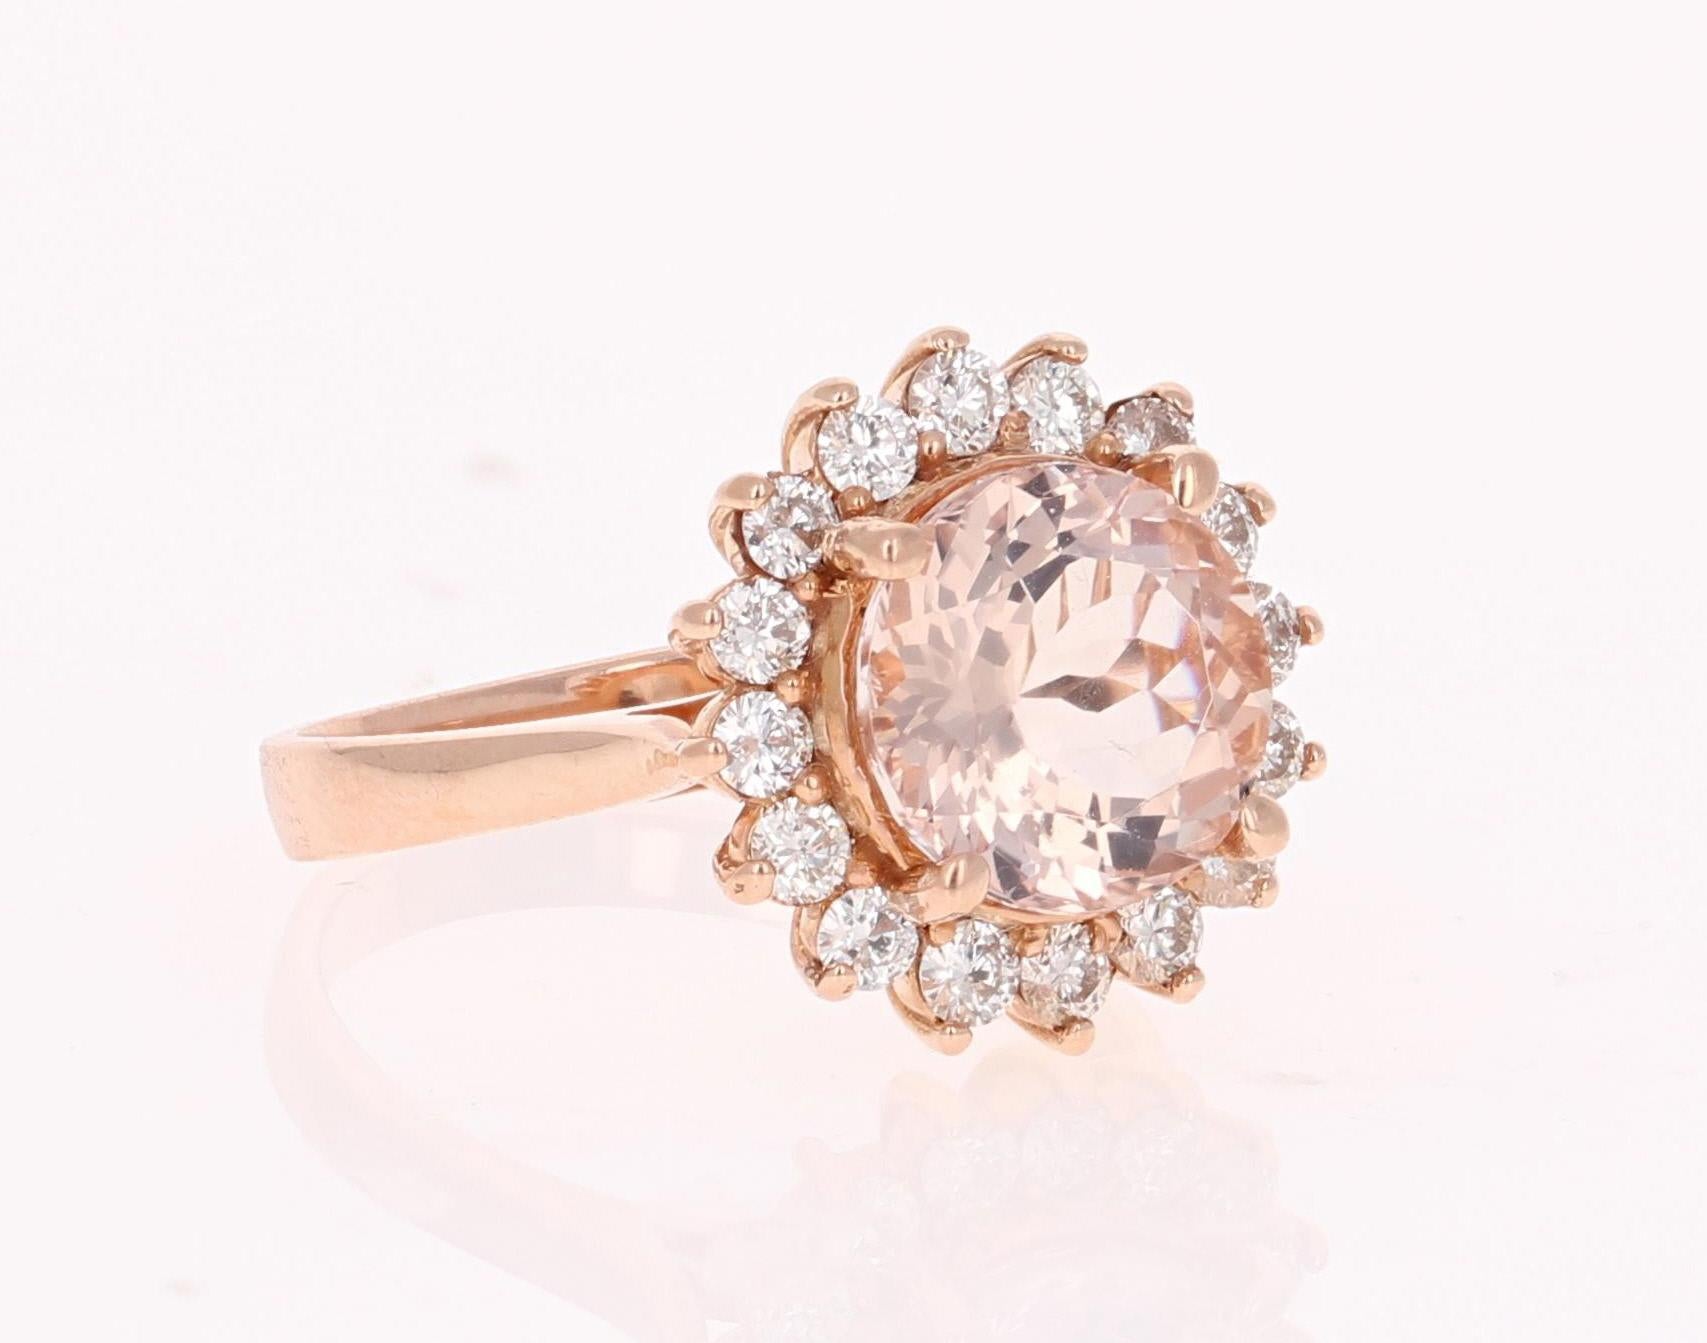 3.54 Carat Morganite Diamond 14K Rose Gold Cocktail Ring

This gorgeous and classy Morganite Ring has a 2.91 Carat Round Cut Morganite as its center and is surrounded by 16 Round Cut Diamonds that weigh 0.63 carats. The clarity and color of the